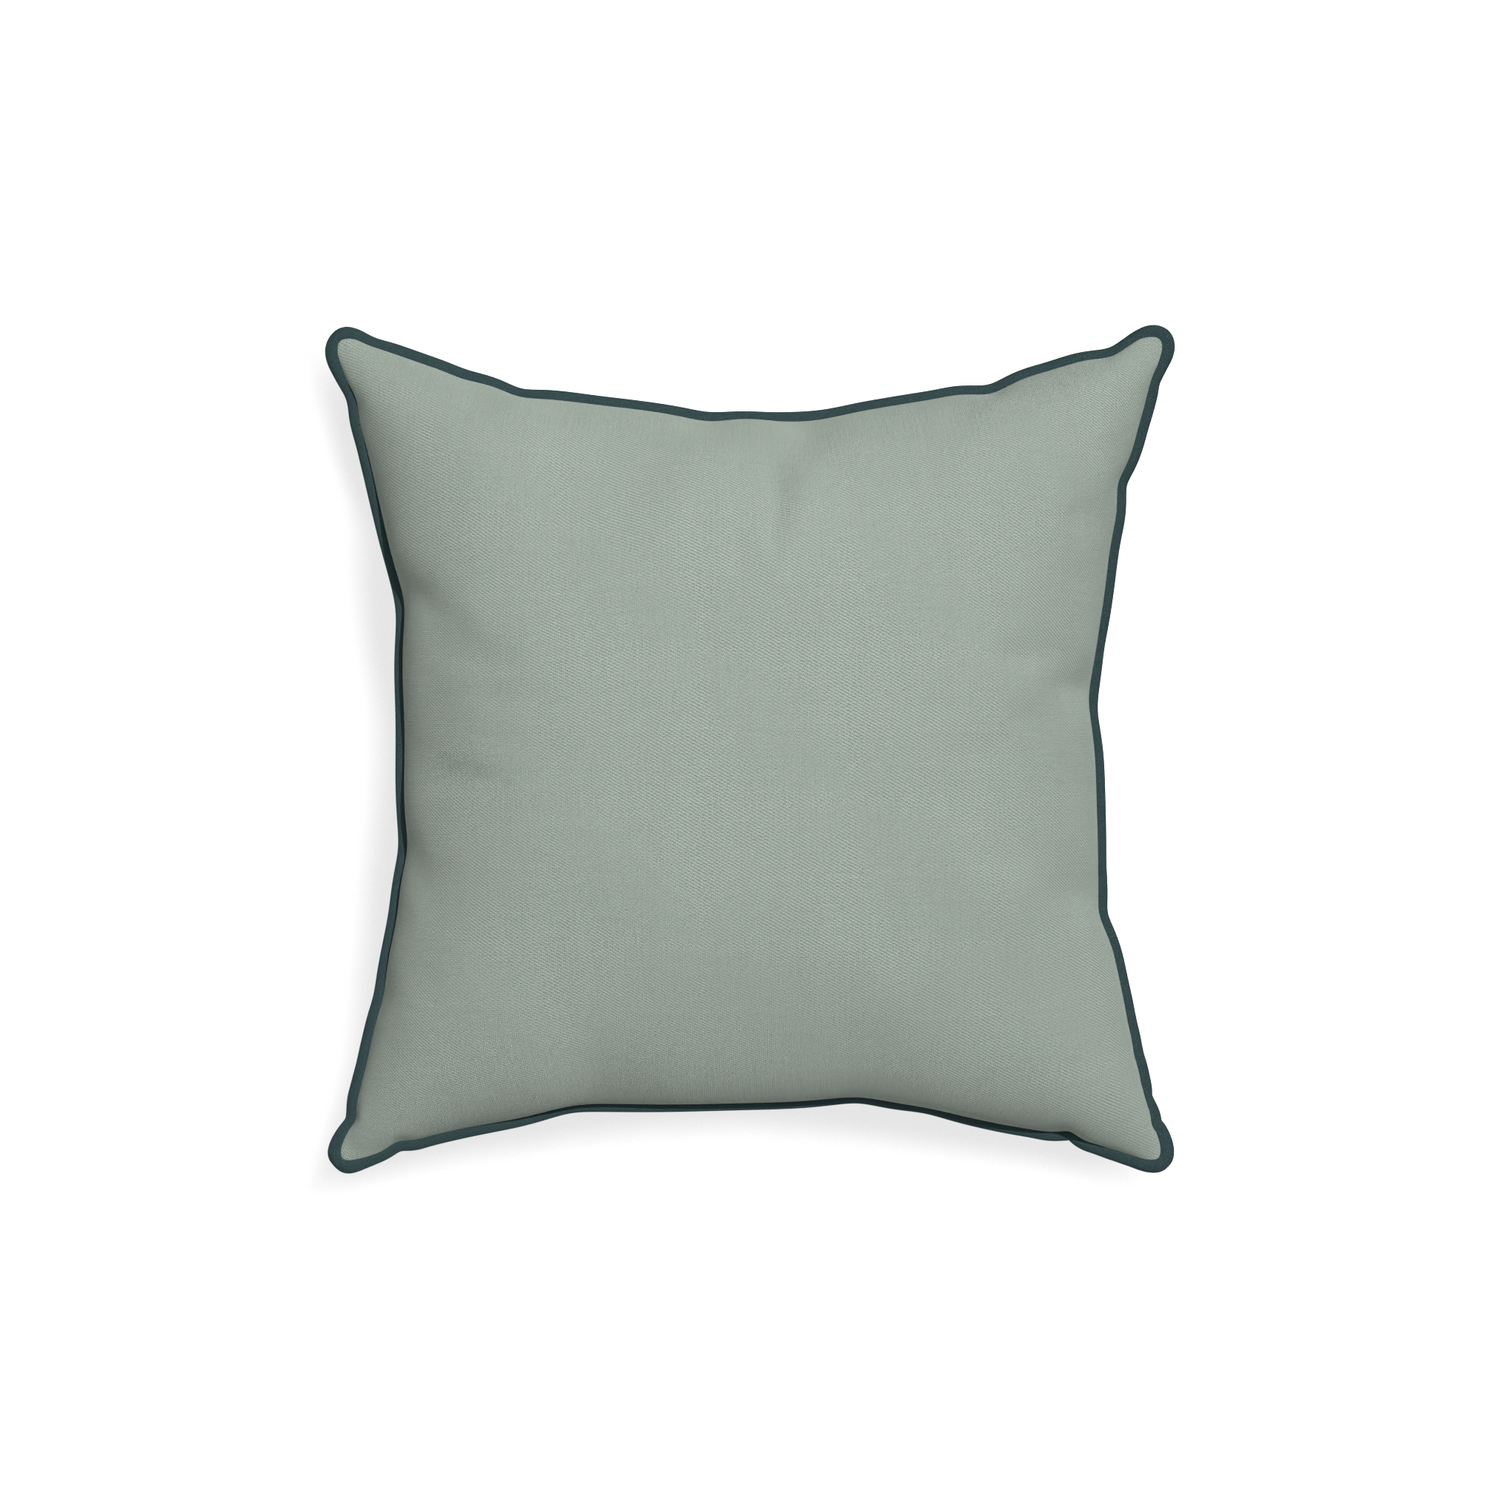 18-square sage custom sage green cottonpillow with p piping on white background